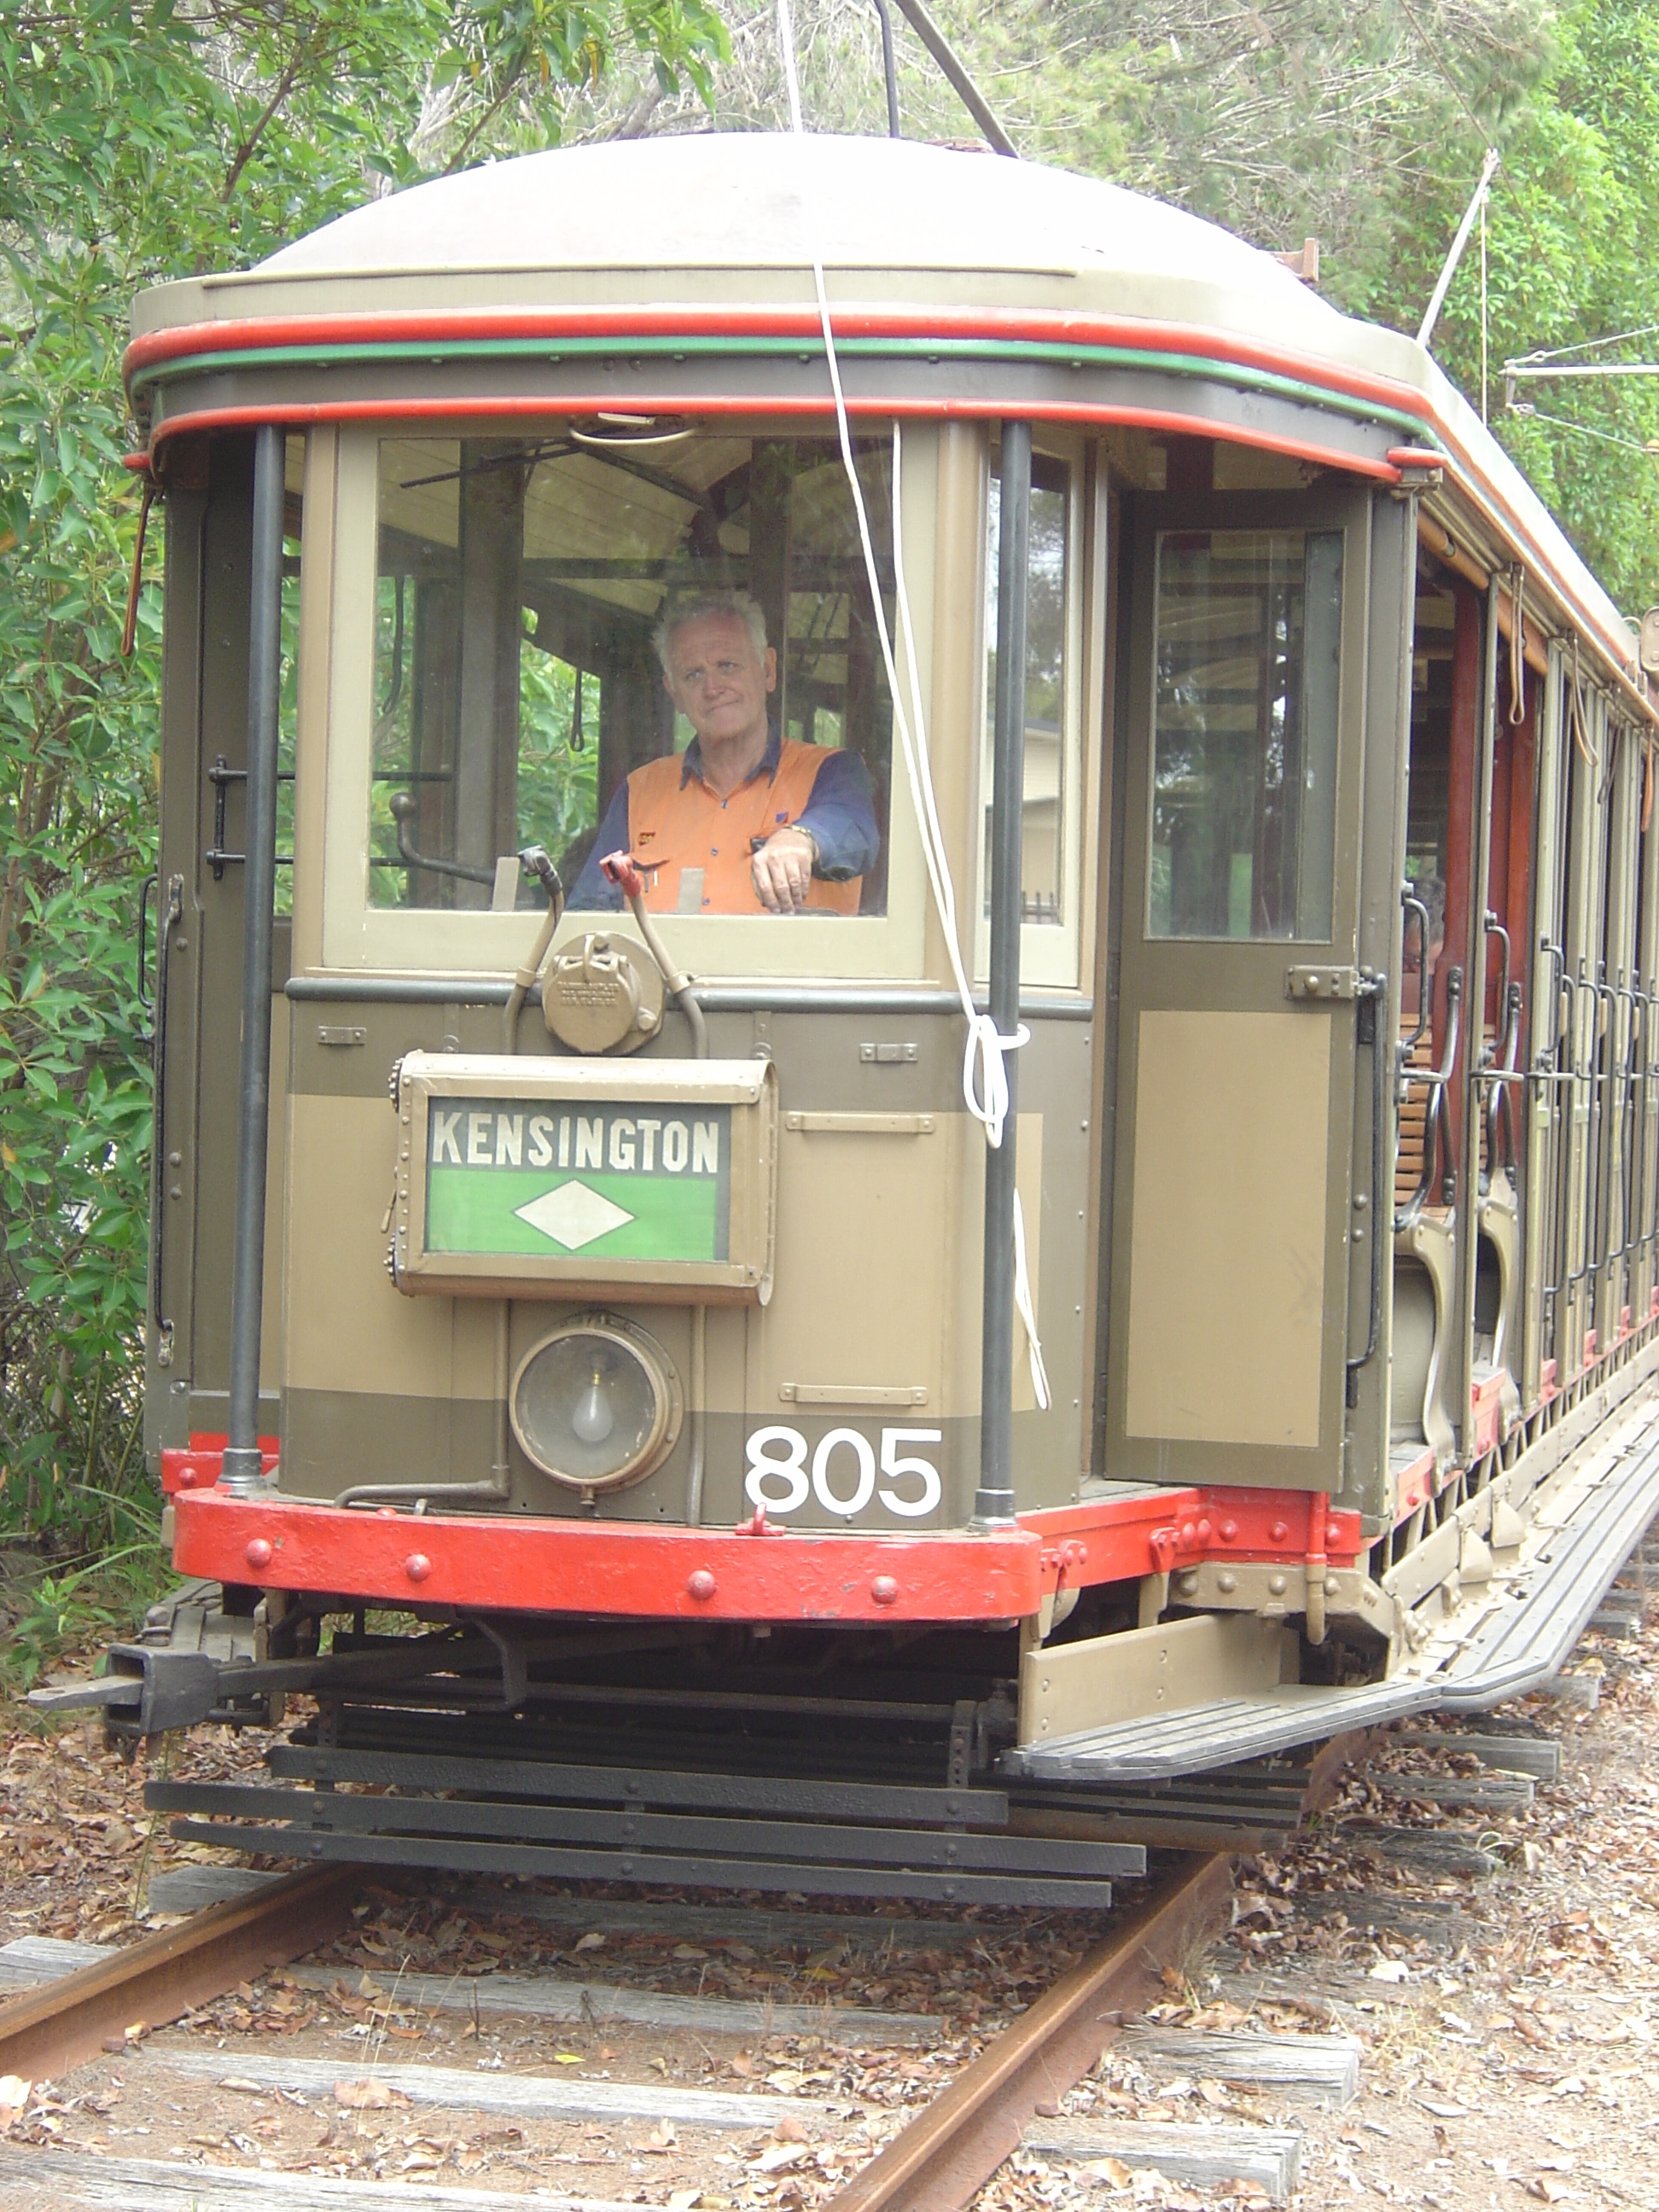 Sydney 'Toastrack' O-class tram by Meadowbank Manufacturing